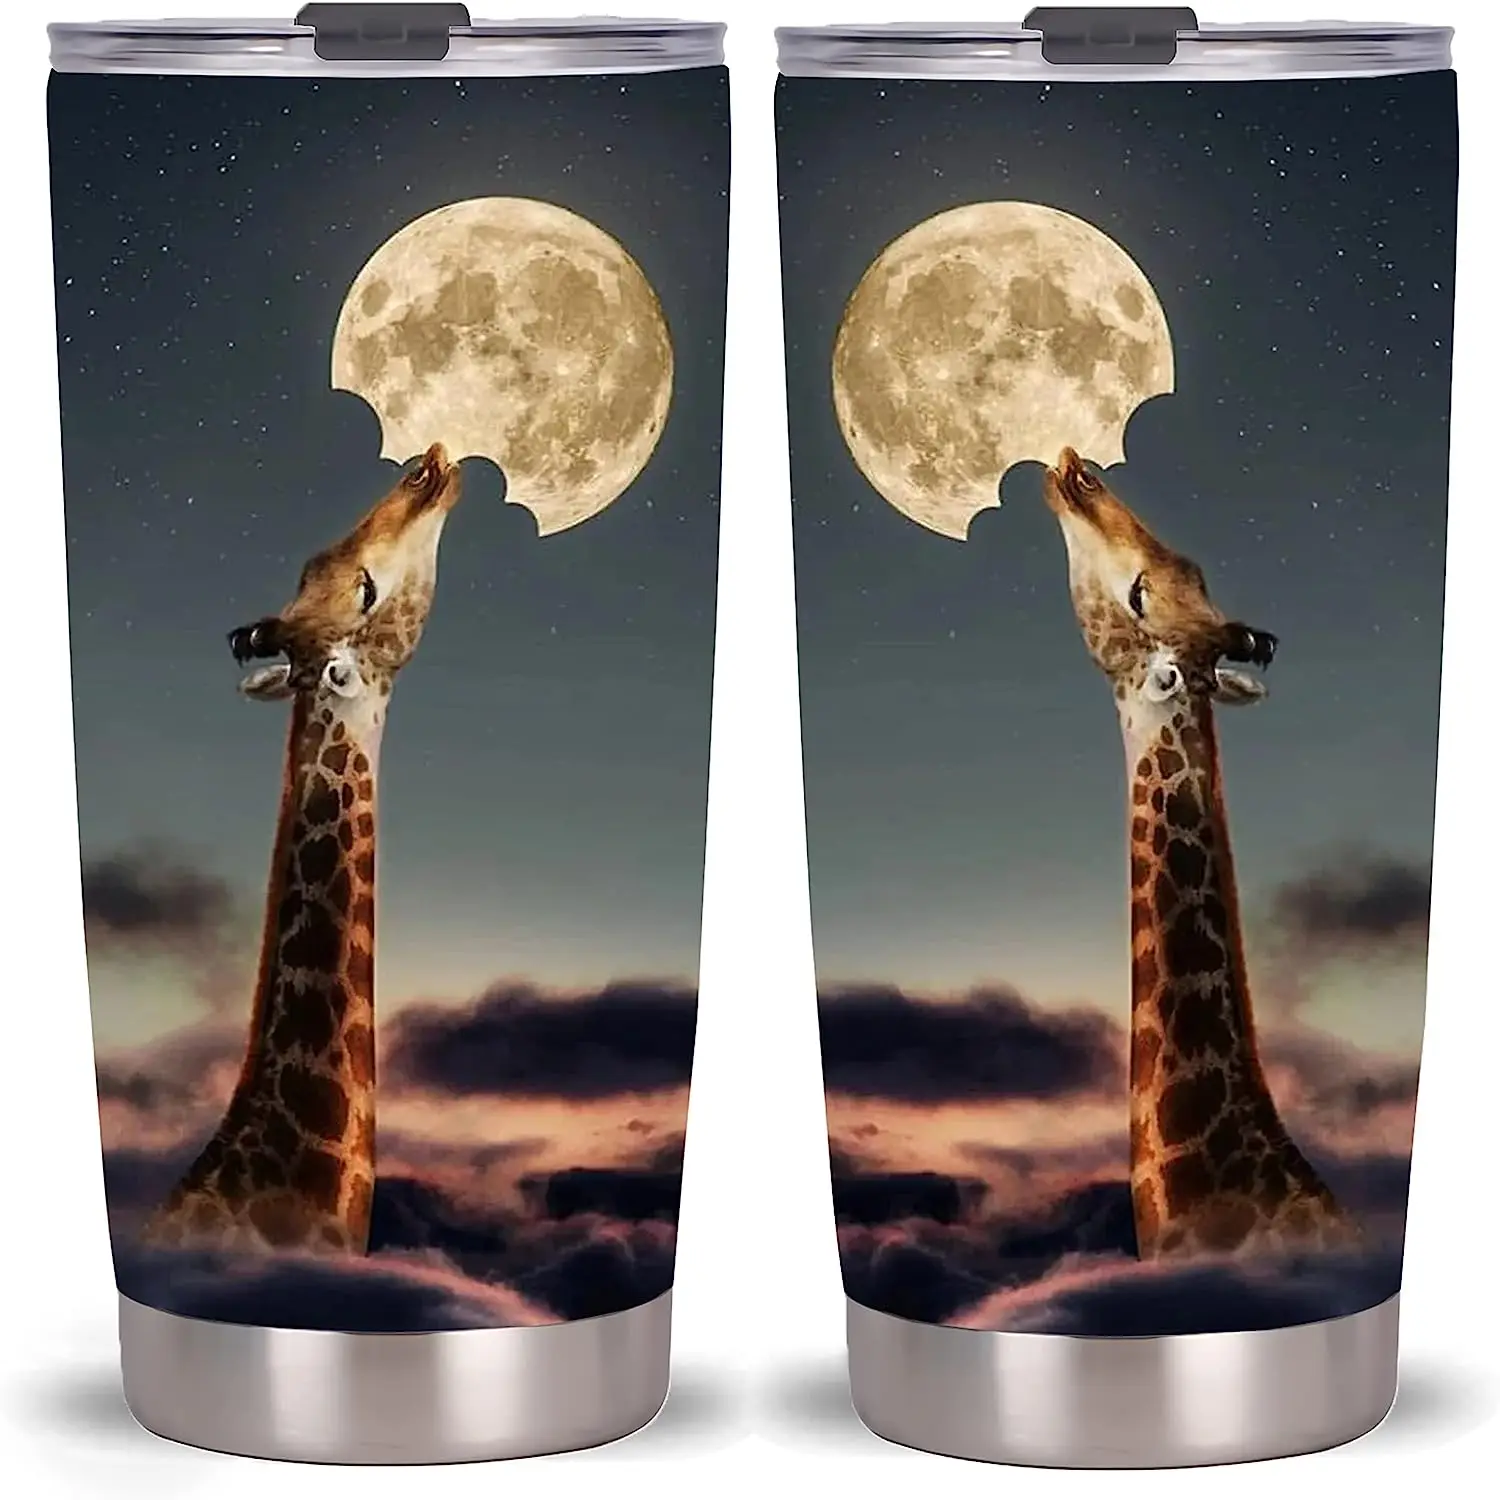 Giraffe Tumbler-Giraffe With Glasses Tumbler Cup with Lid-Unique